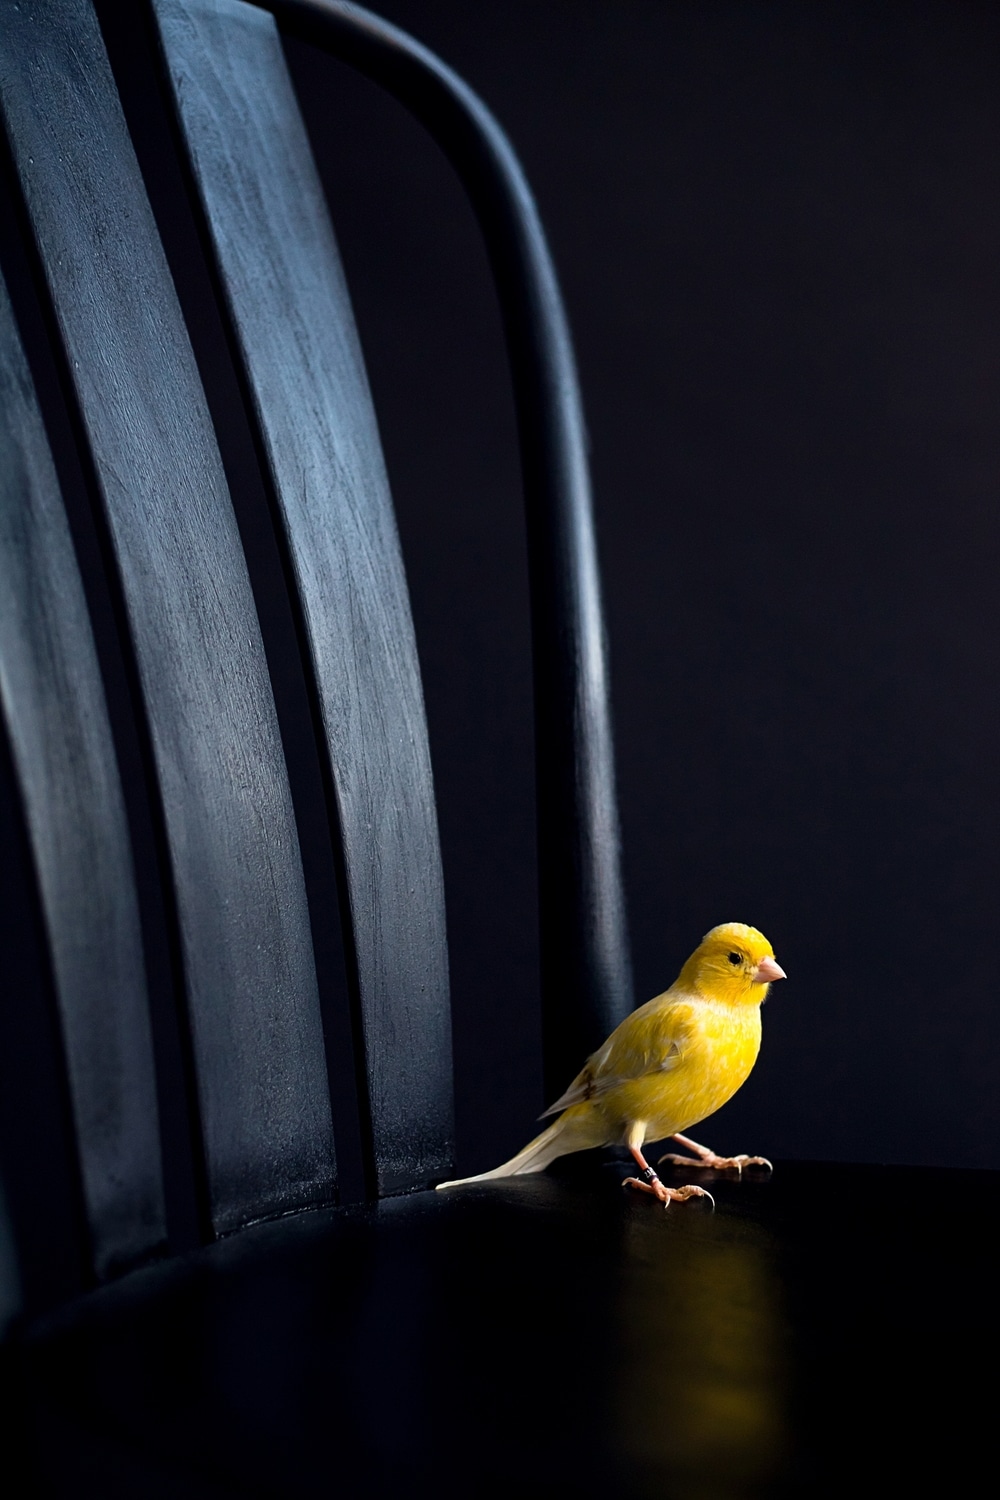 yellow harz canary sitting on a black chair